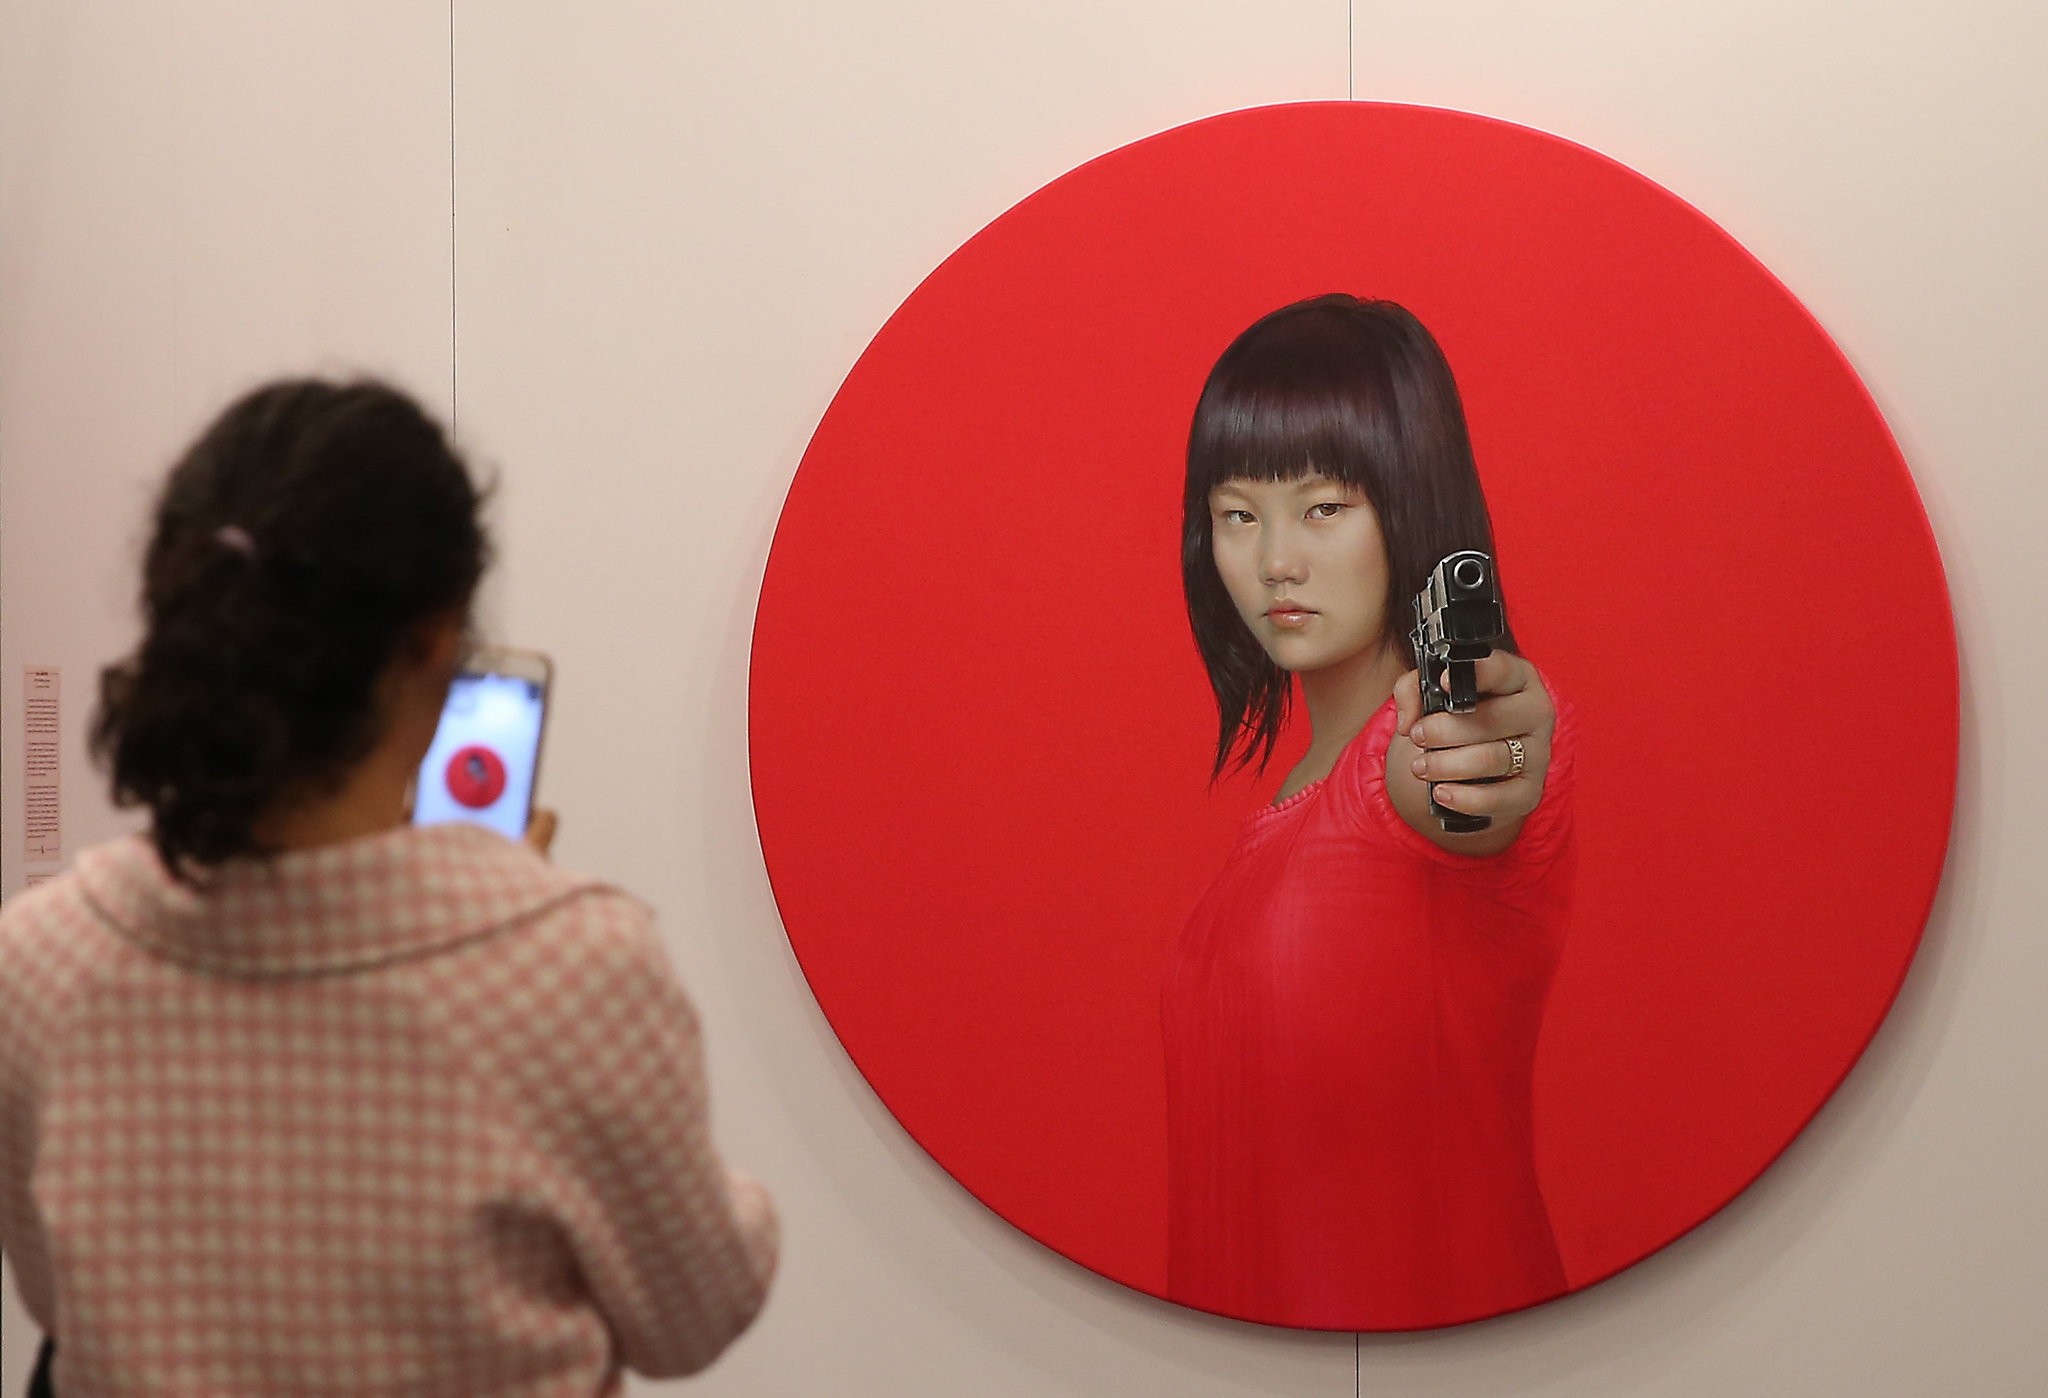 An art enthusiast takes a photo of one of the artworks being exhibited at the 13th Contemporary Art Istanbul.